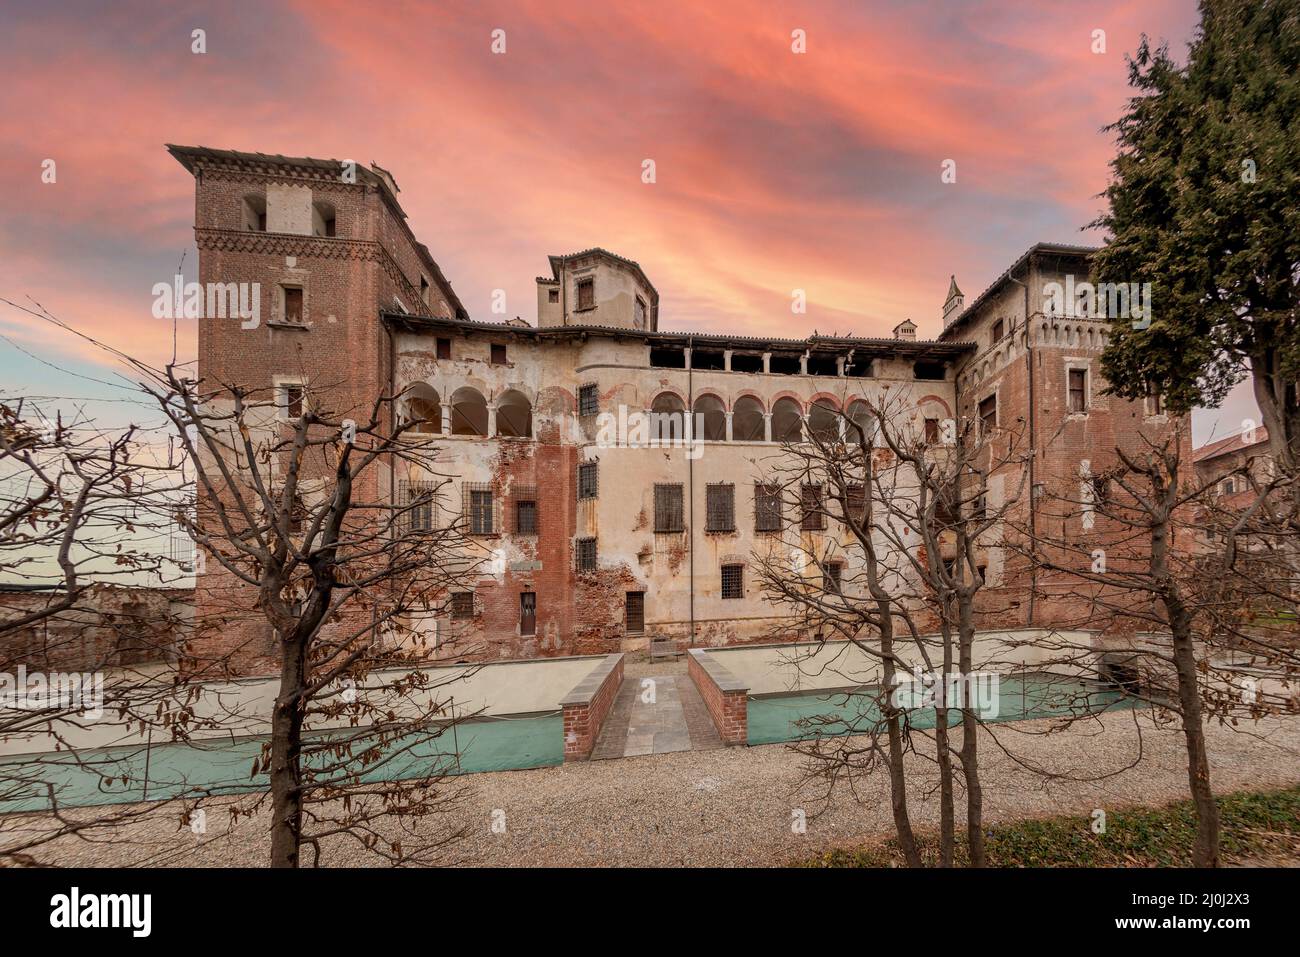 Lagnasco, Cuneo, Italy - March 16, 2022: The Castles of the Marquises Tapparelli D'Azeglio (11th to 18th century) with sky with colored sunset clouds Stock Photo